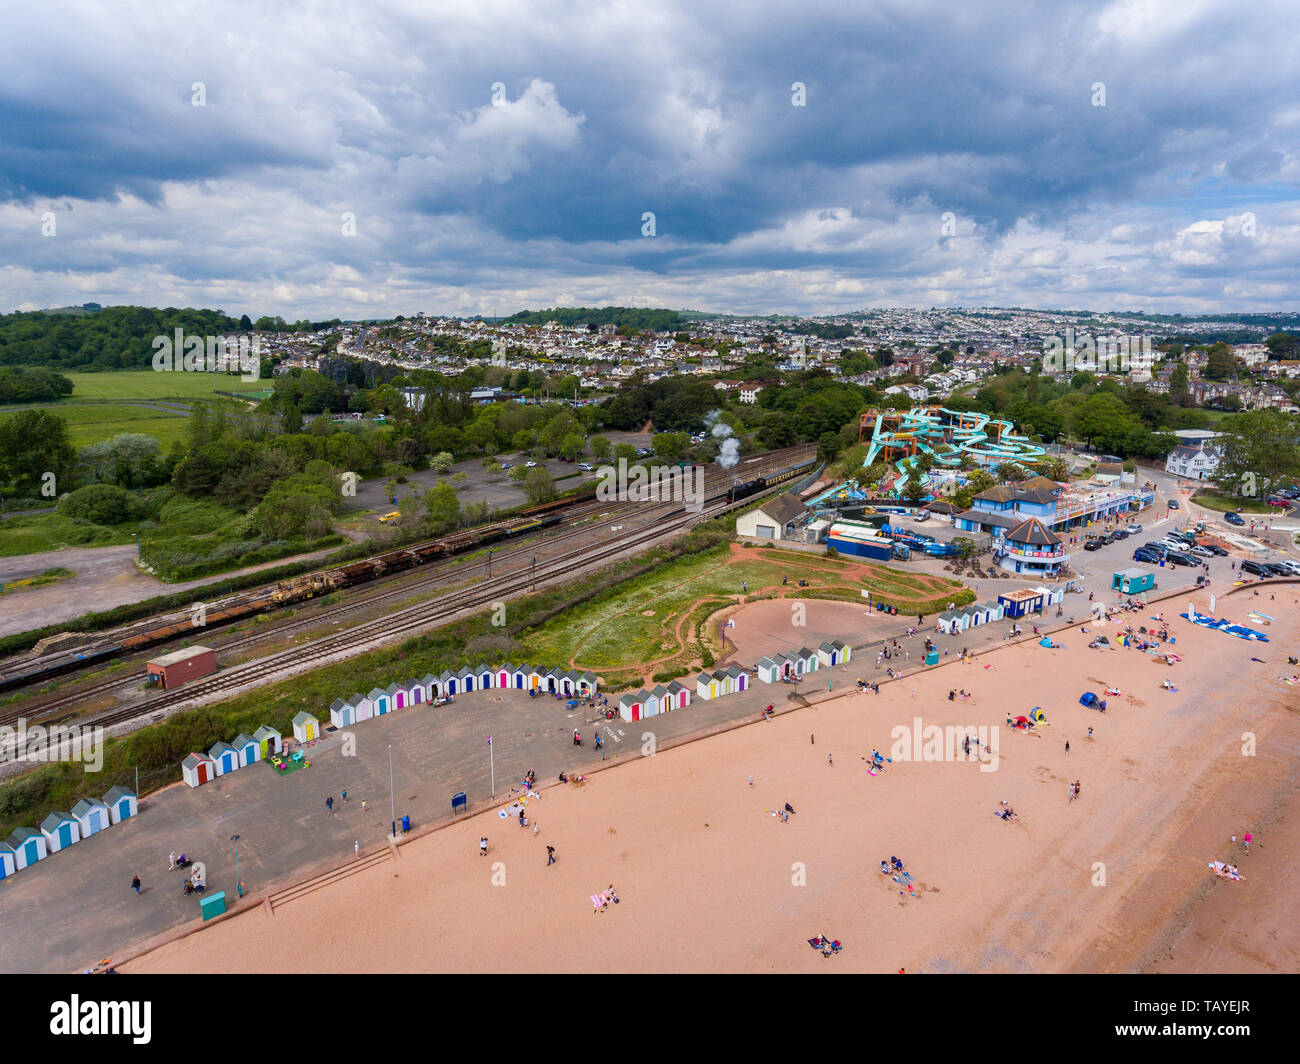 Aerial drone view looking straight down from above colorful summer time fun at water park near a beach Stock Photo